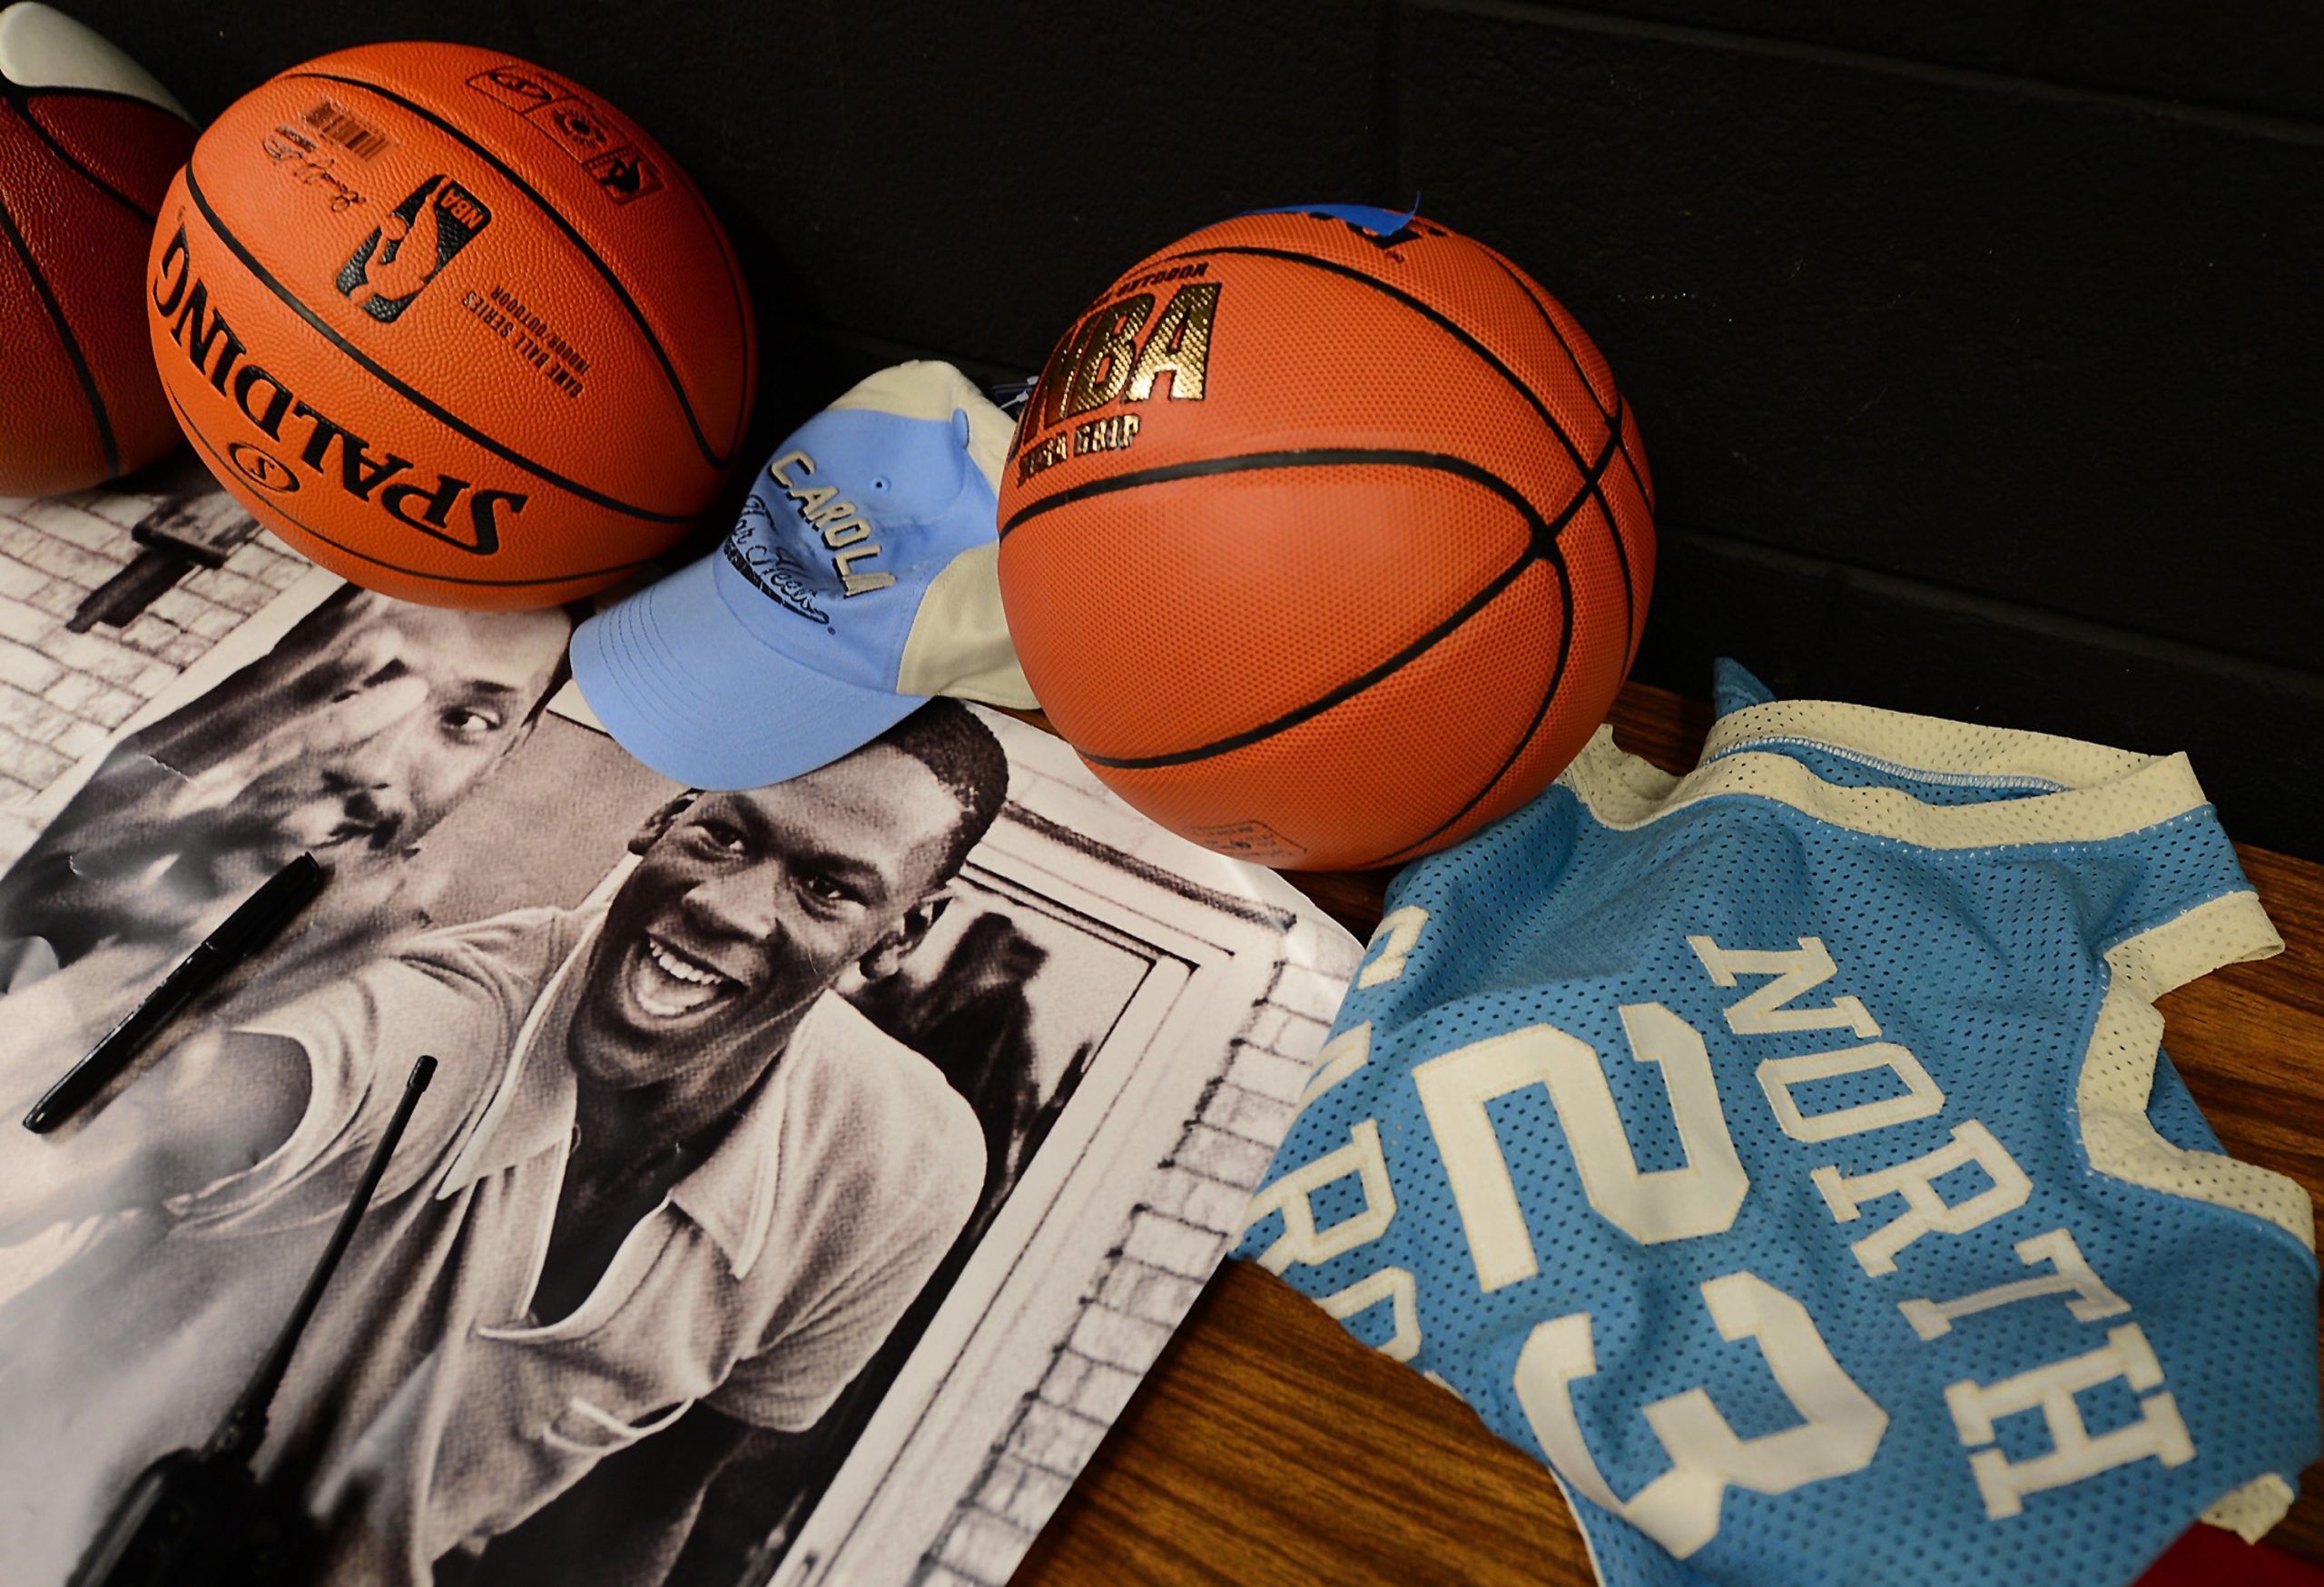 Michael Jordan items sit on a table backstage at Vance High School on Thursday, March 21, 2013. Bobcats Sports and Entertainment, along with FOX Sports Carolinas/Sports South announced a $200,000 donation to Y Achievers, a YMCA of Greater Charlotte program that operates in partnership with Charlotte-Mecklenburg Schools.